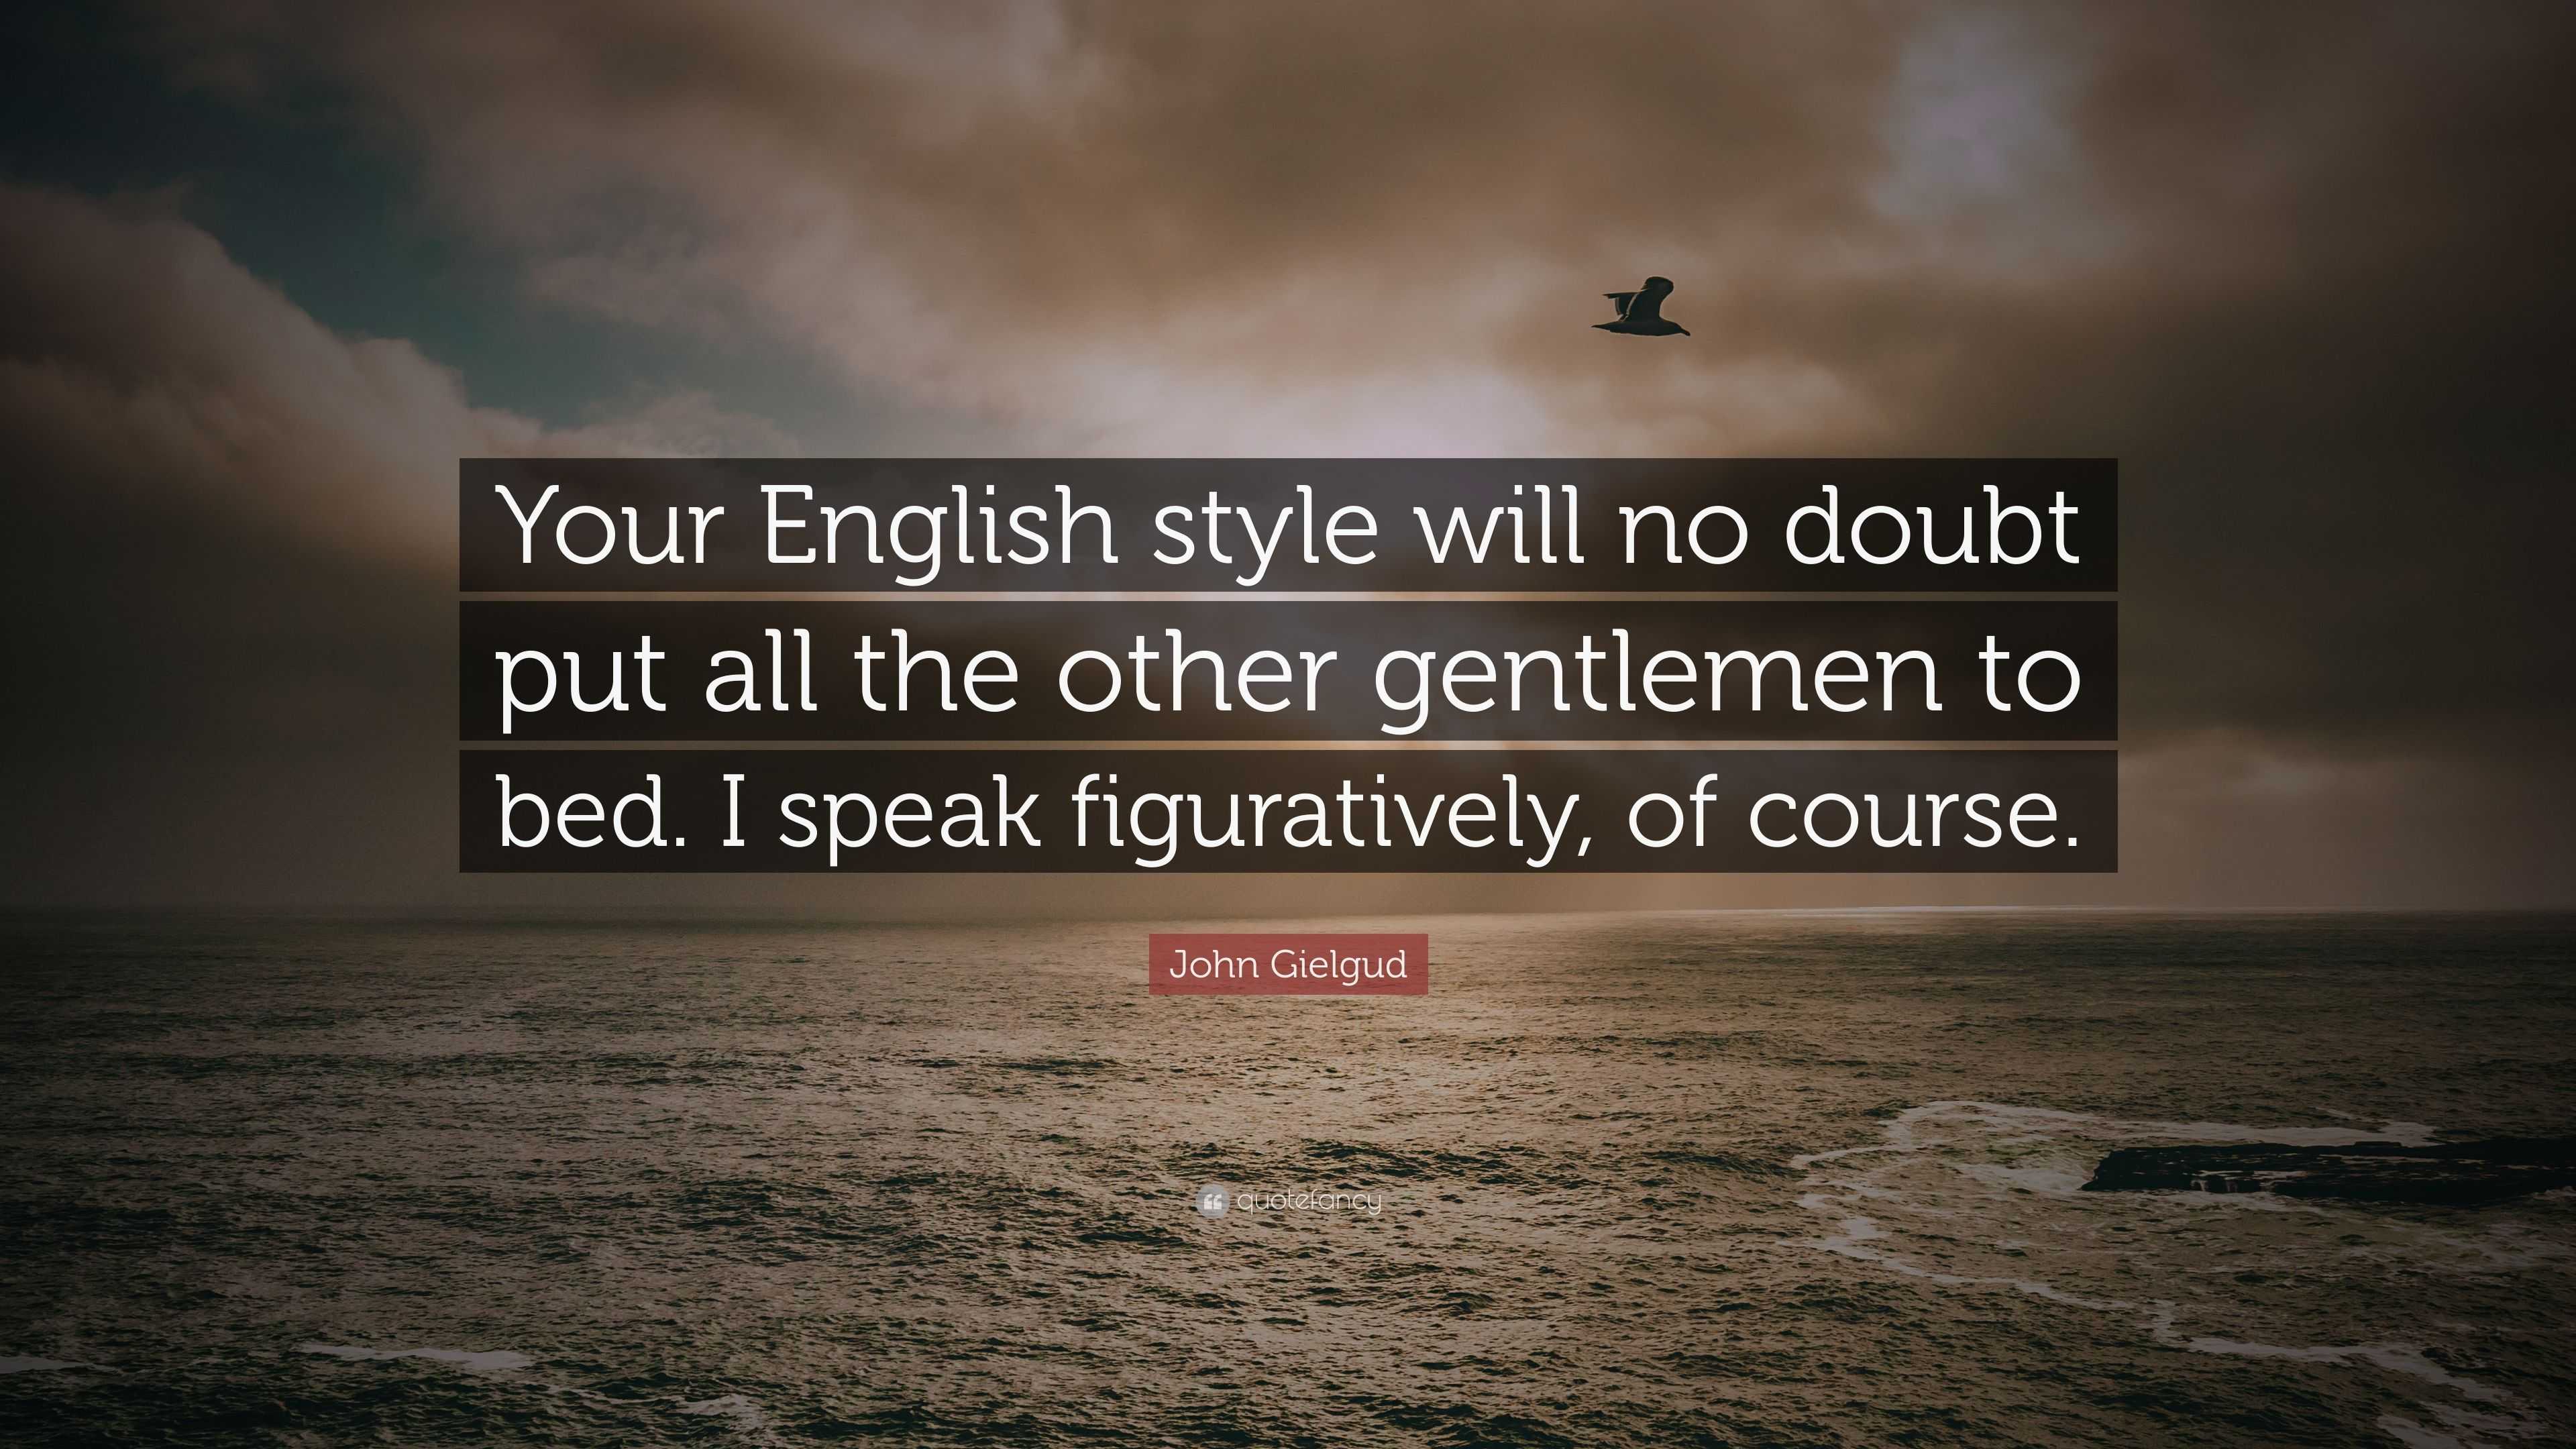 John Gielgud Quote: “Your English style will no doubt put all the other ...